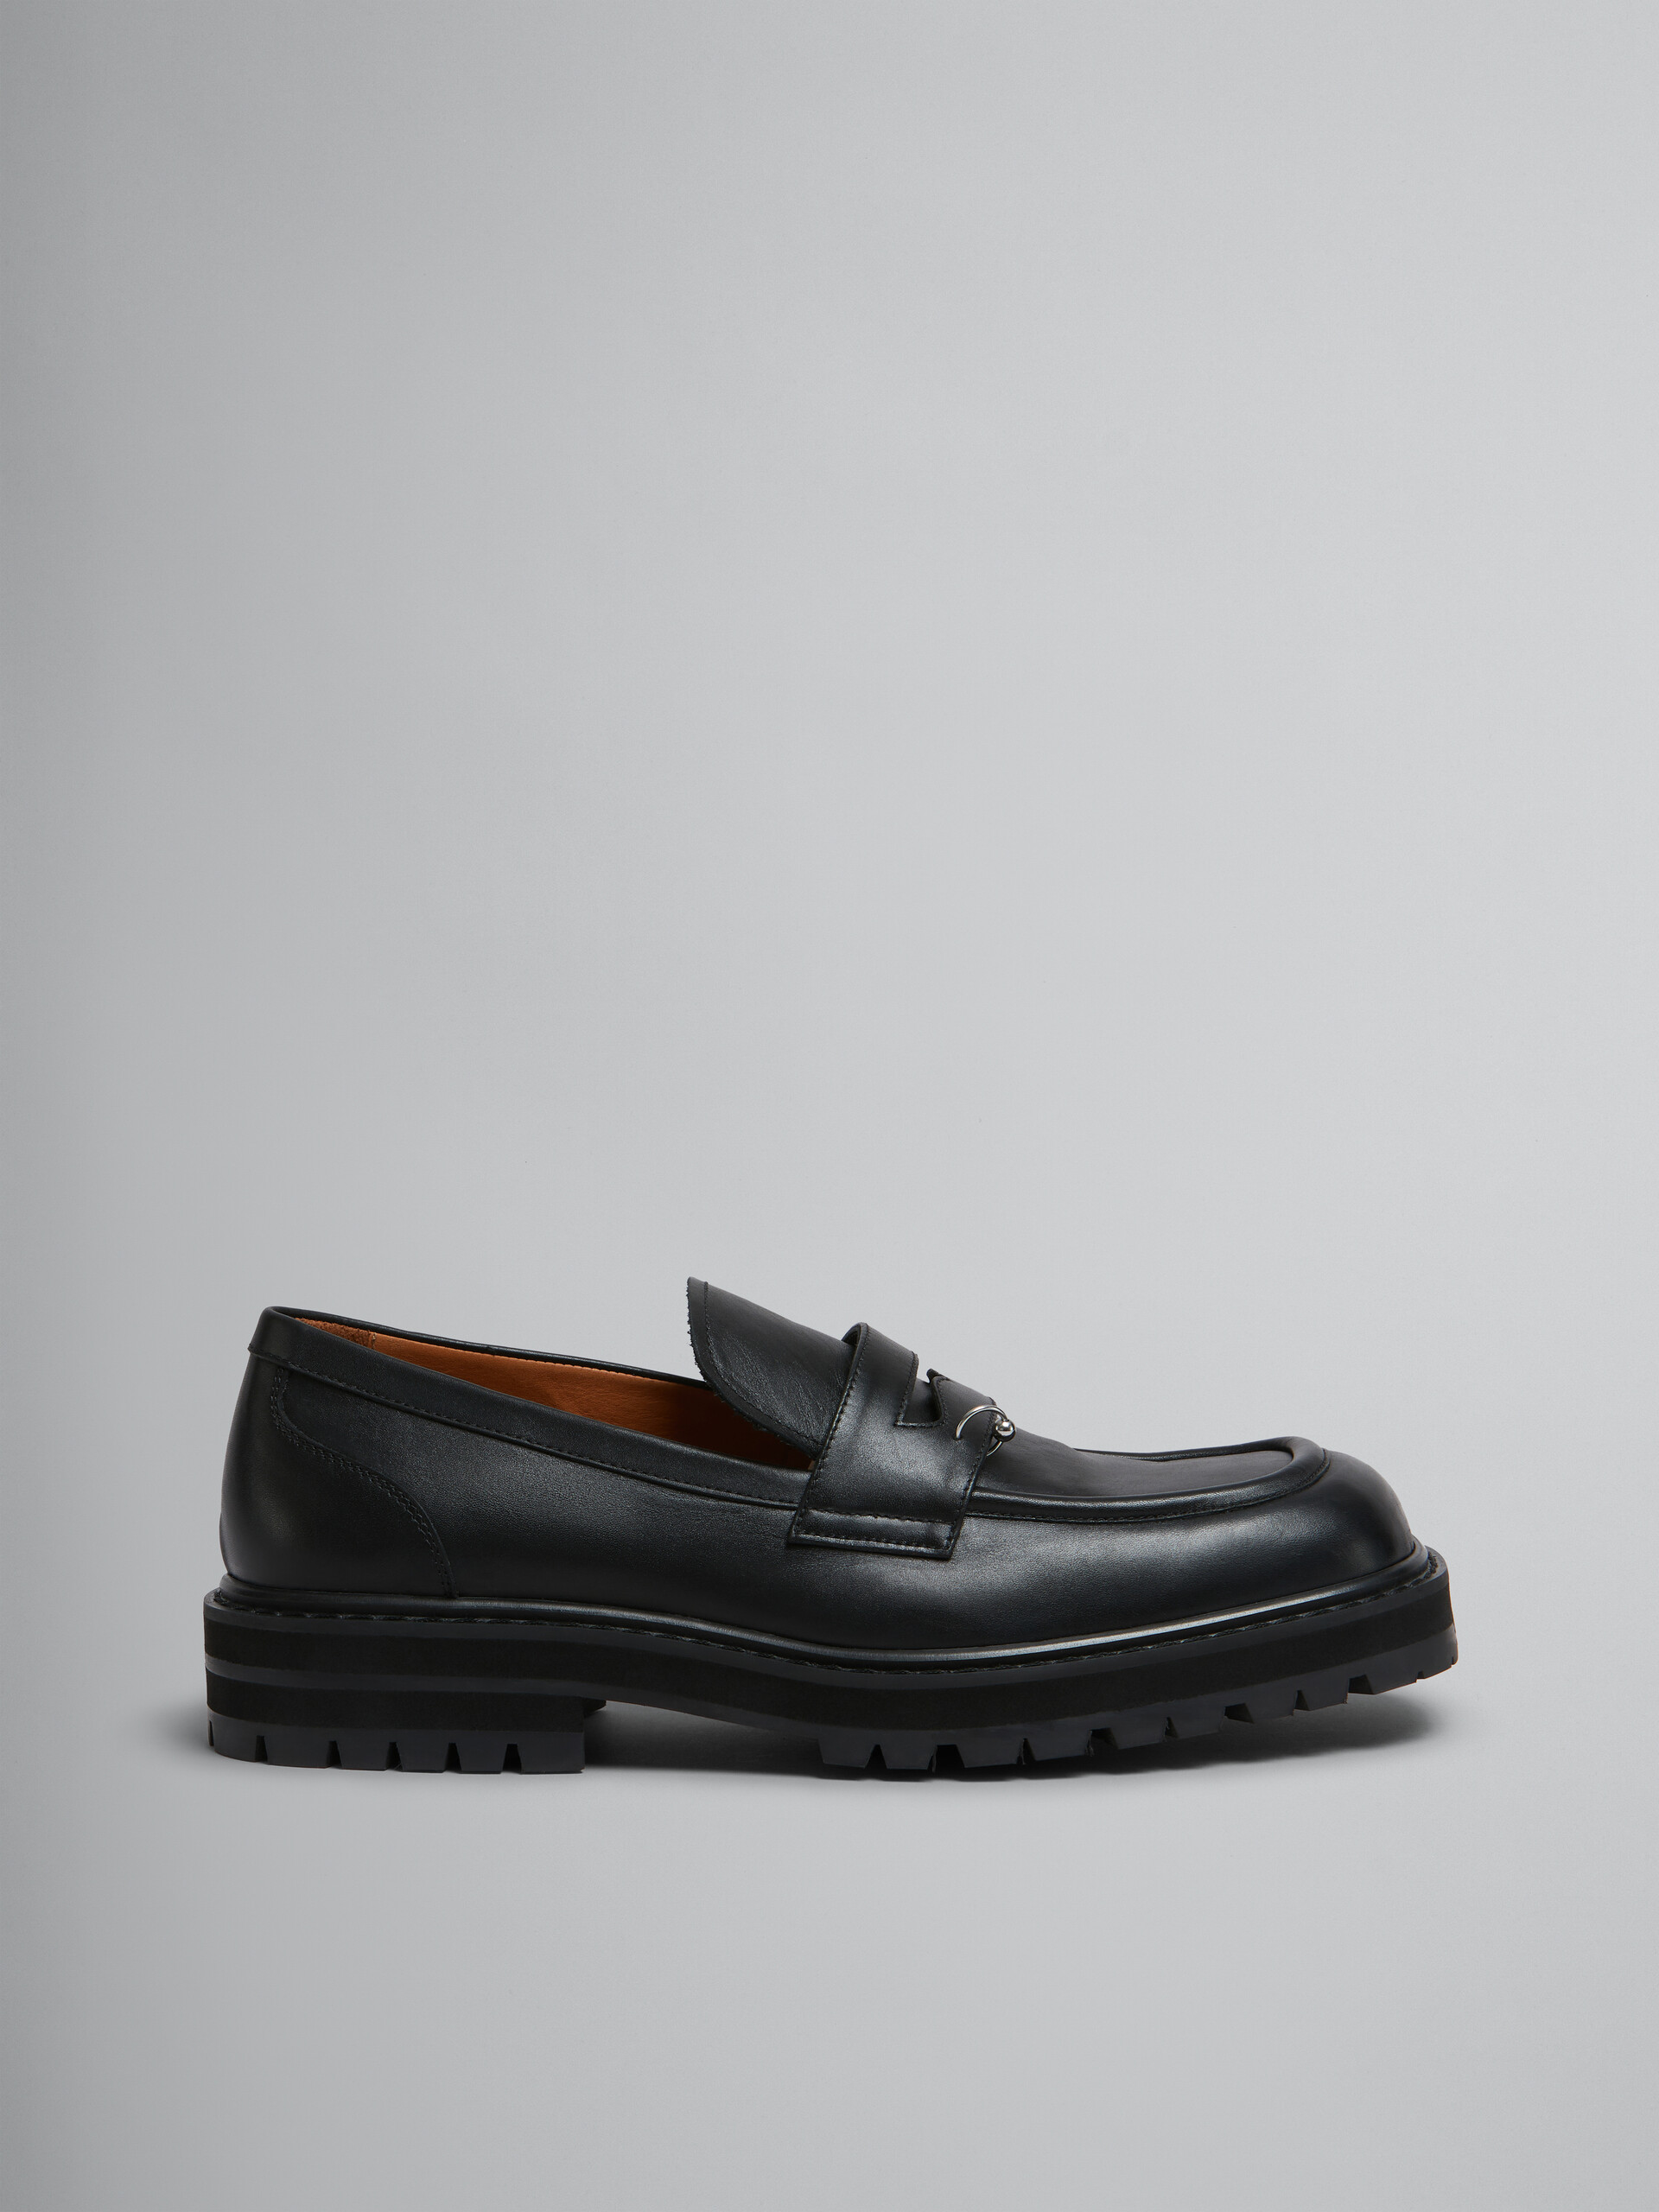 Black leather Piercing 2.0 chunky loafer - Lace-ups - Image 1